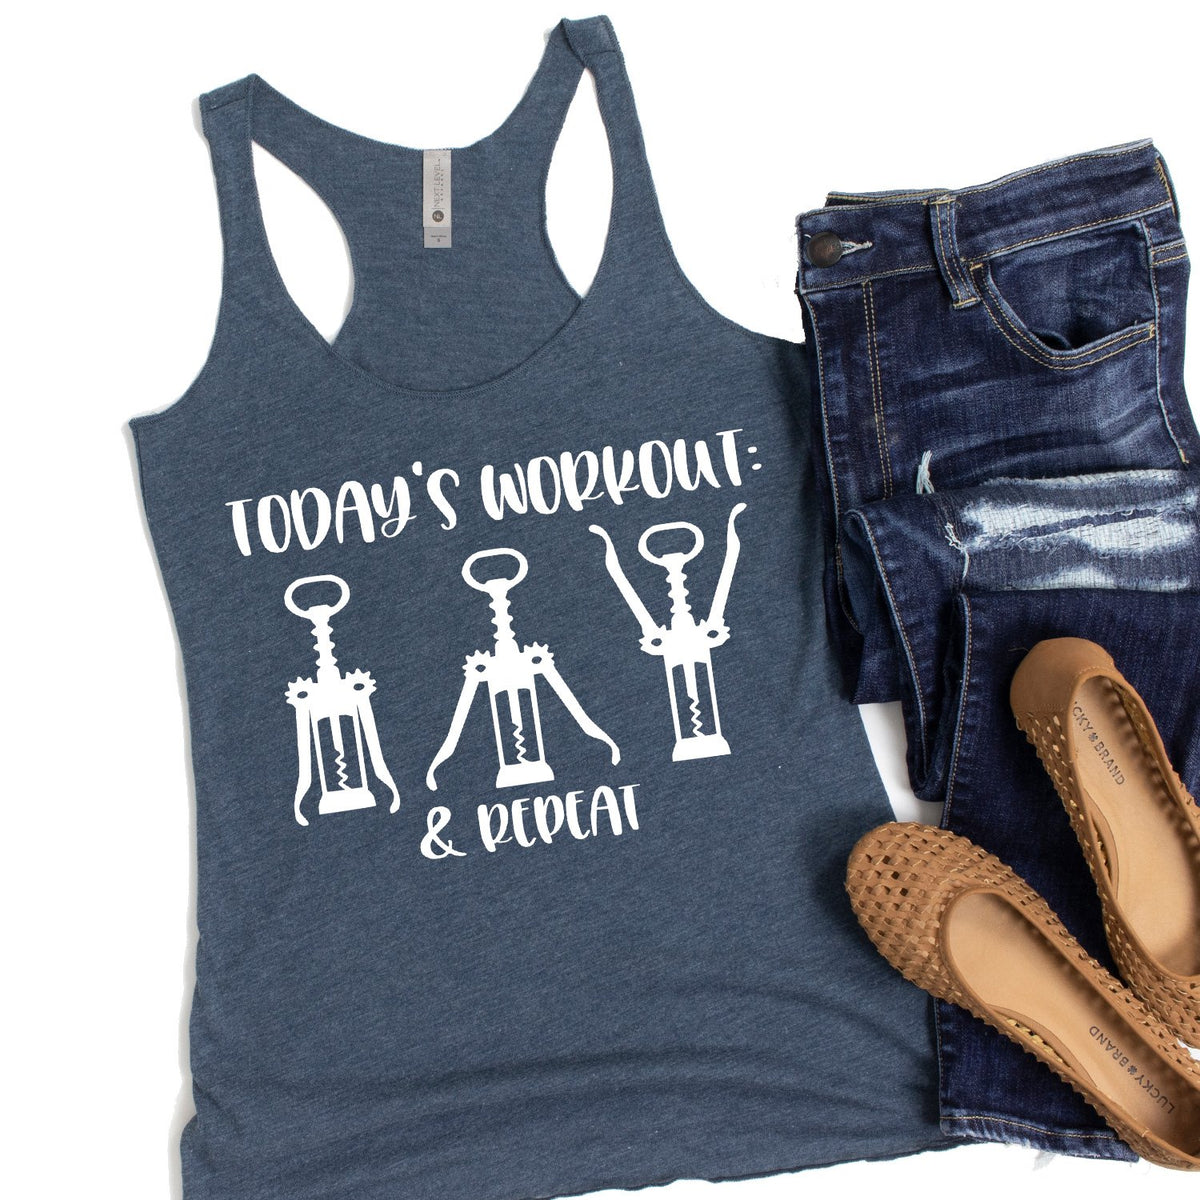 Today&#39;s Workout: Wine &amp; Repeat - Tank Top Racerback